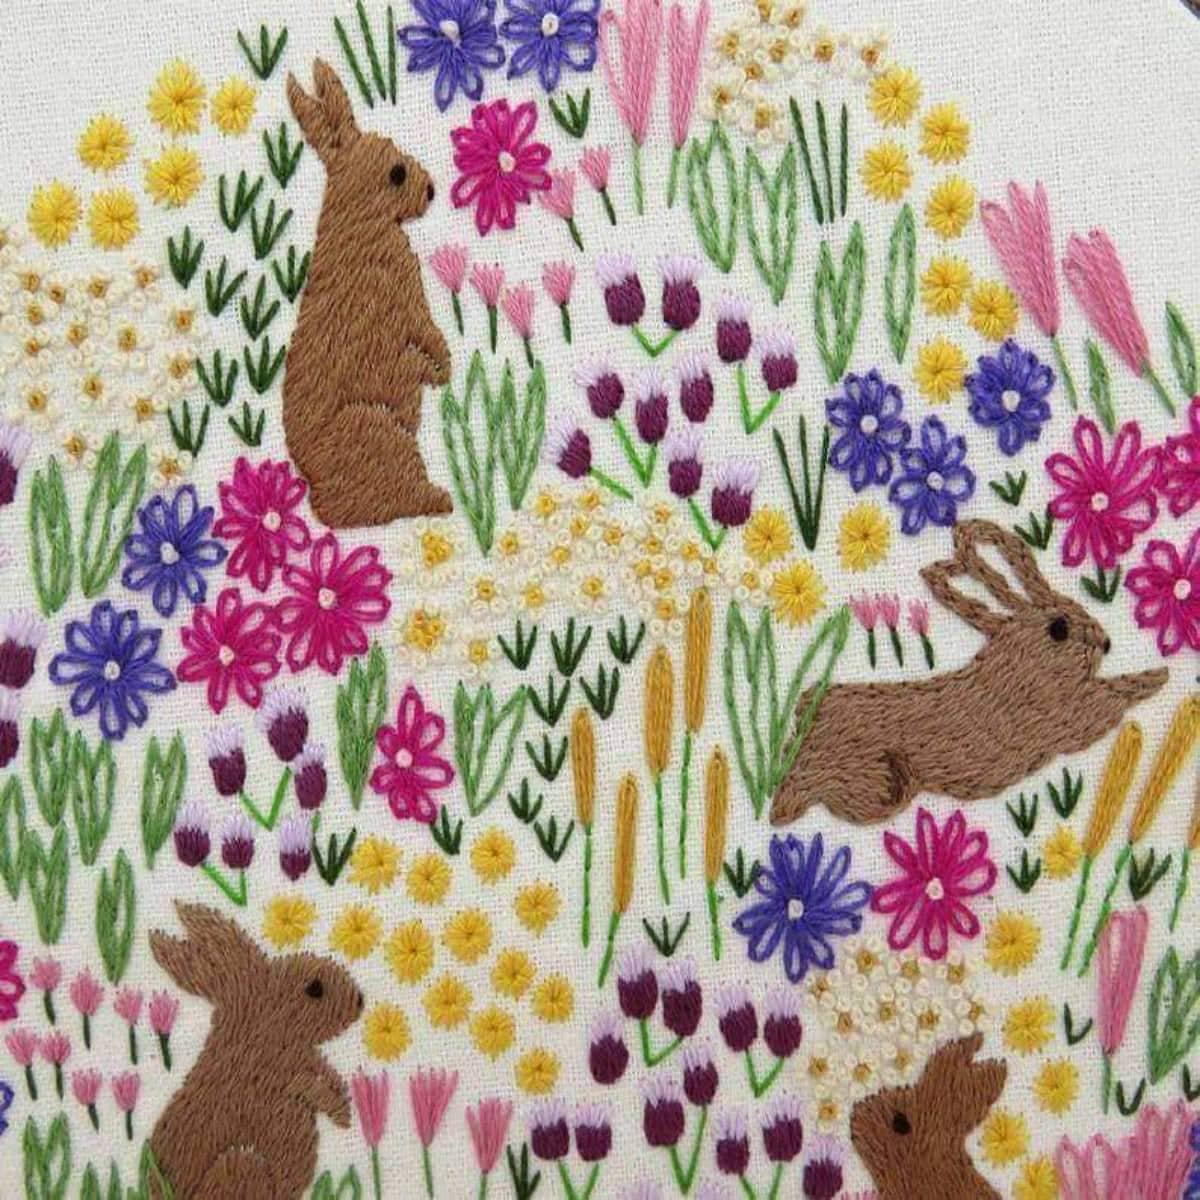 Wild Flowers and Rabbits Hand Embroidery Pattern , PDF Download , StitchDoodles , embroidery hoop kit, embroidery kit for adults, embroidery kit for beginners, embroidery kits for adults, embroidery kits for beginers, modern embroidery kits , StitchDoodles , shop.stitchdoodles.com